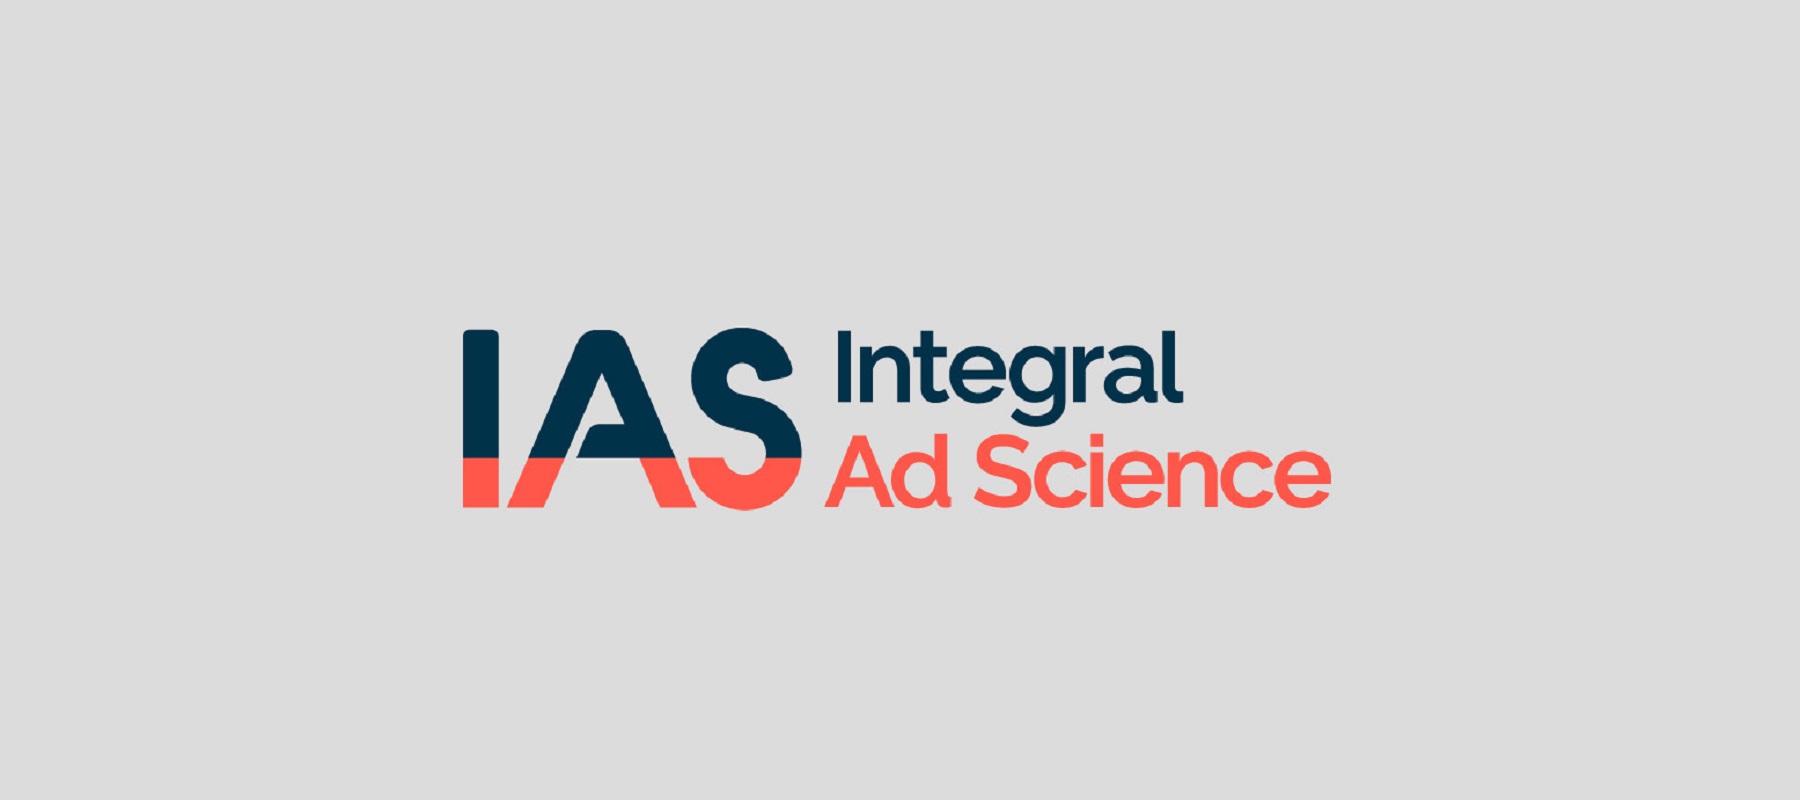 IAS announces first attention product to unify media quality and eye tracking